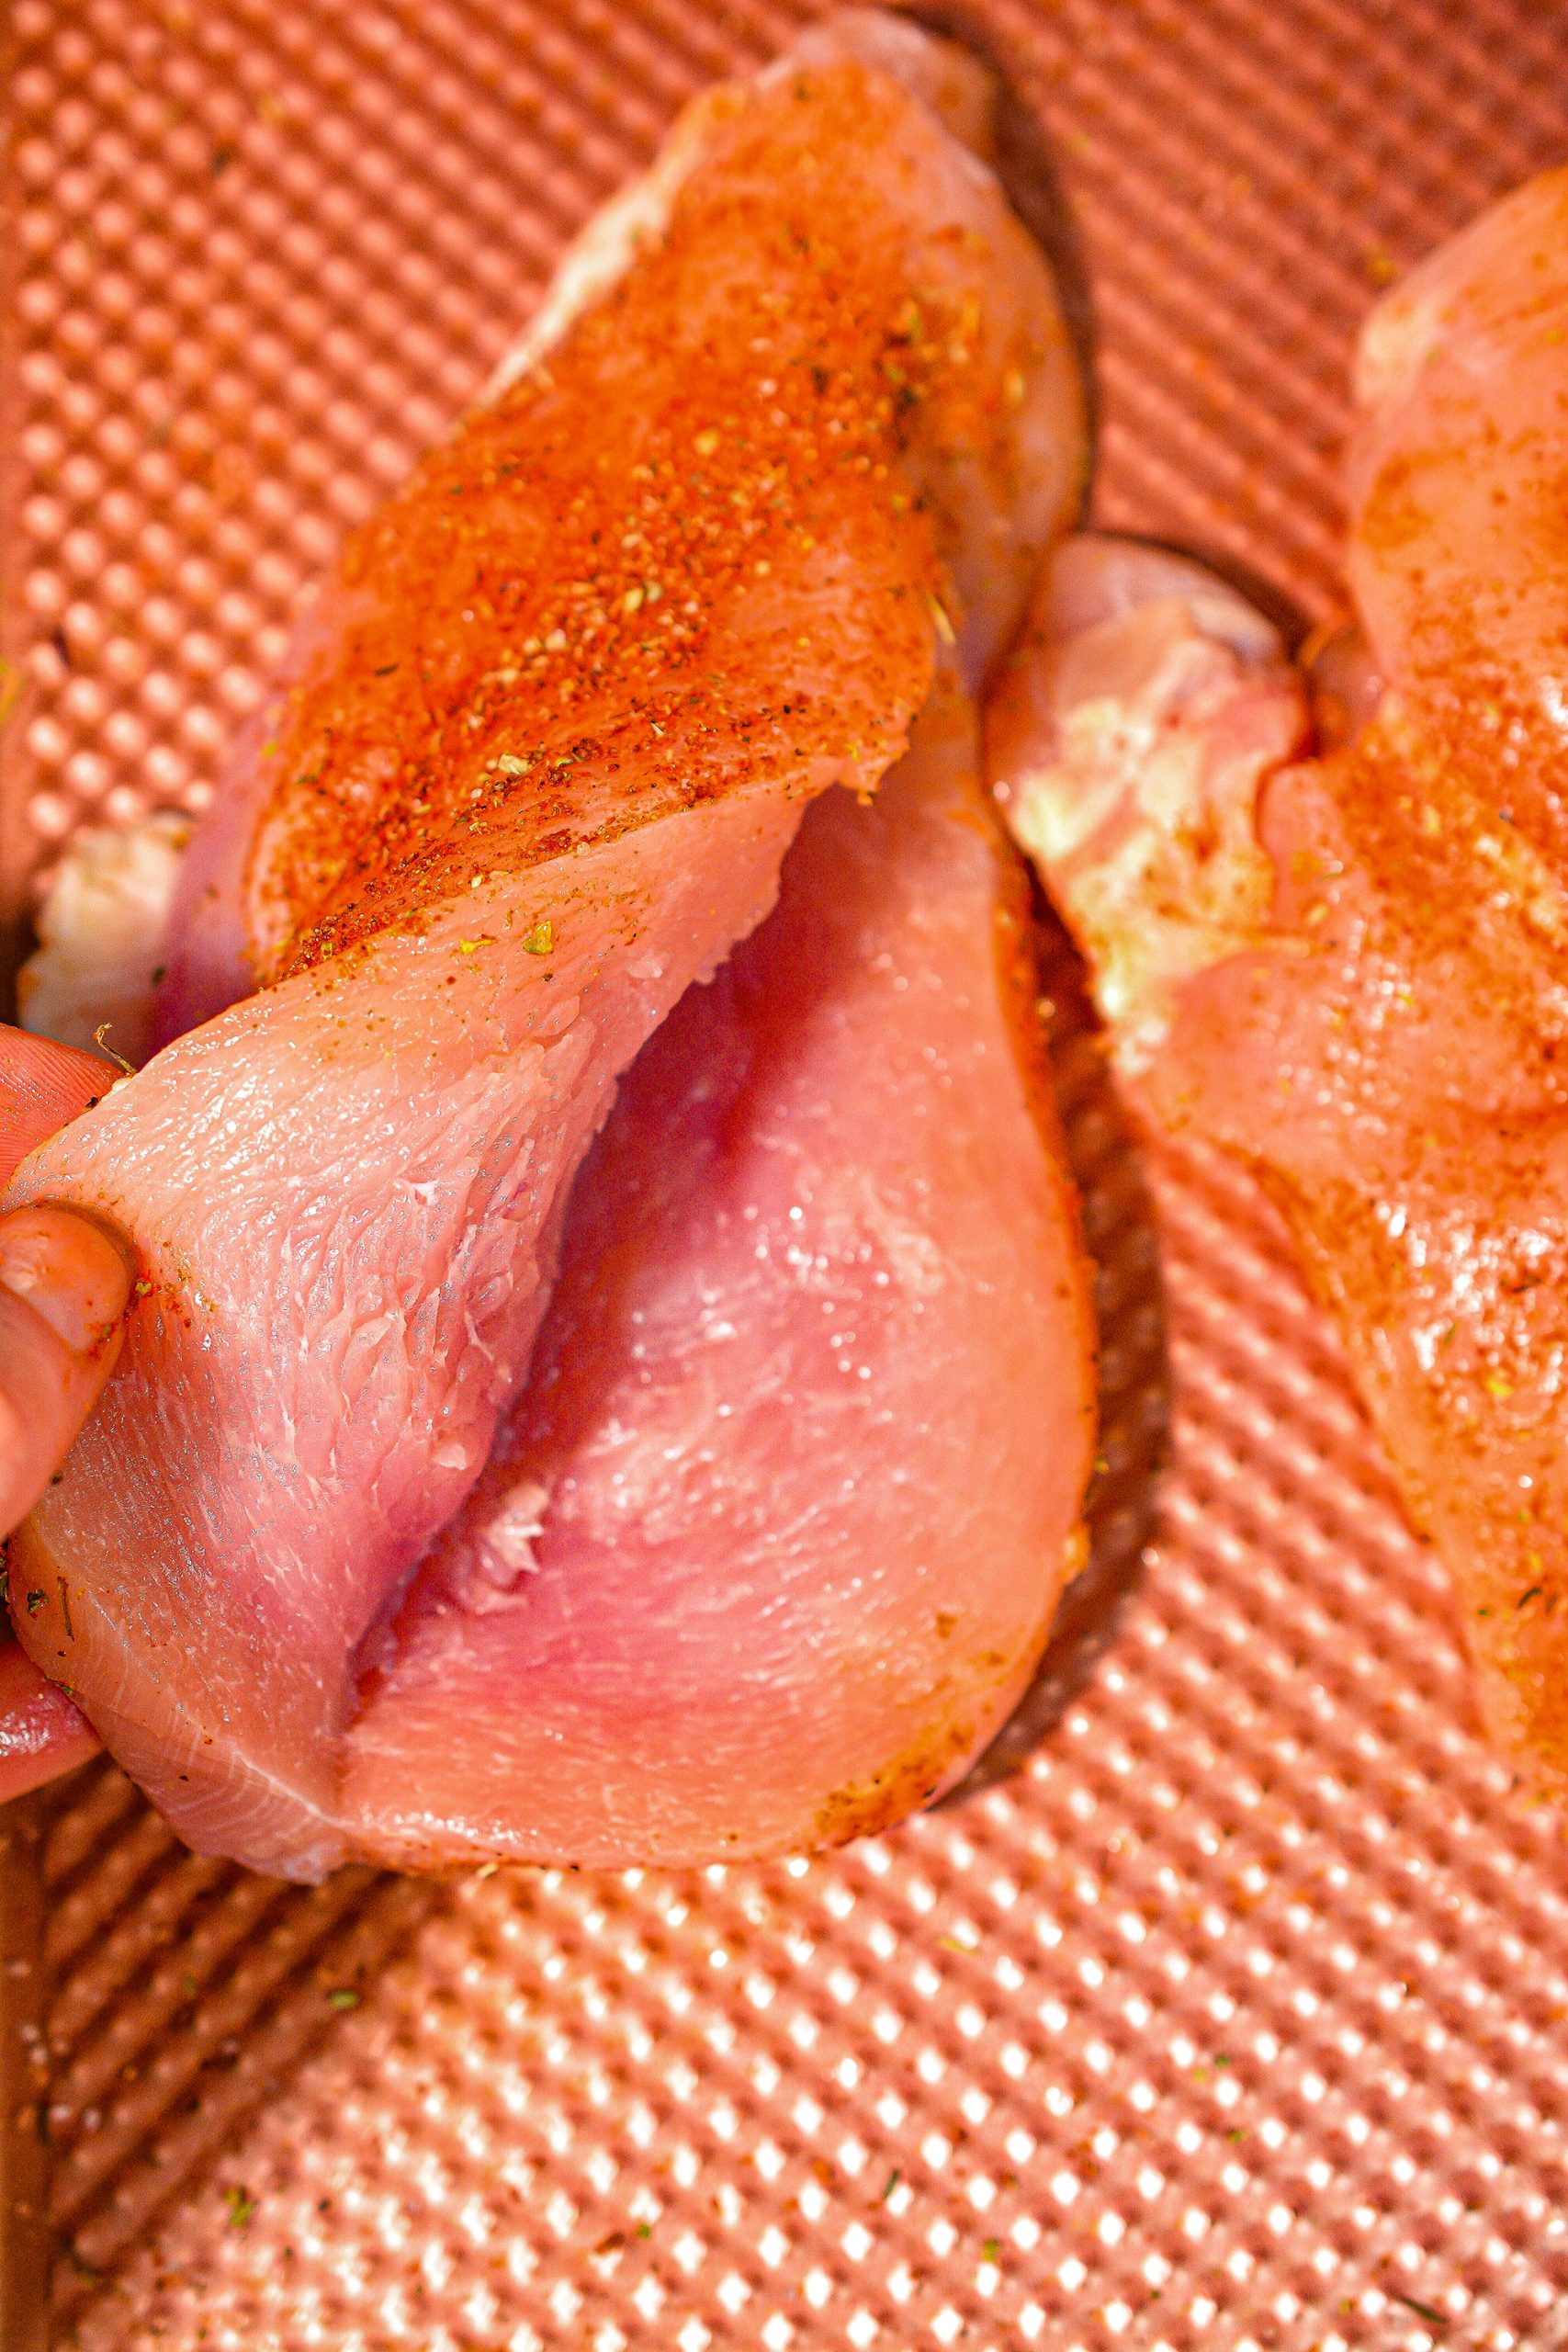 Slice pockets into the side of each chicken breast so that they can be stuffed.